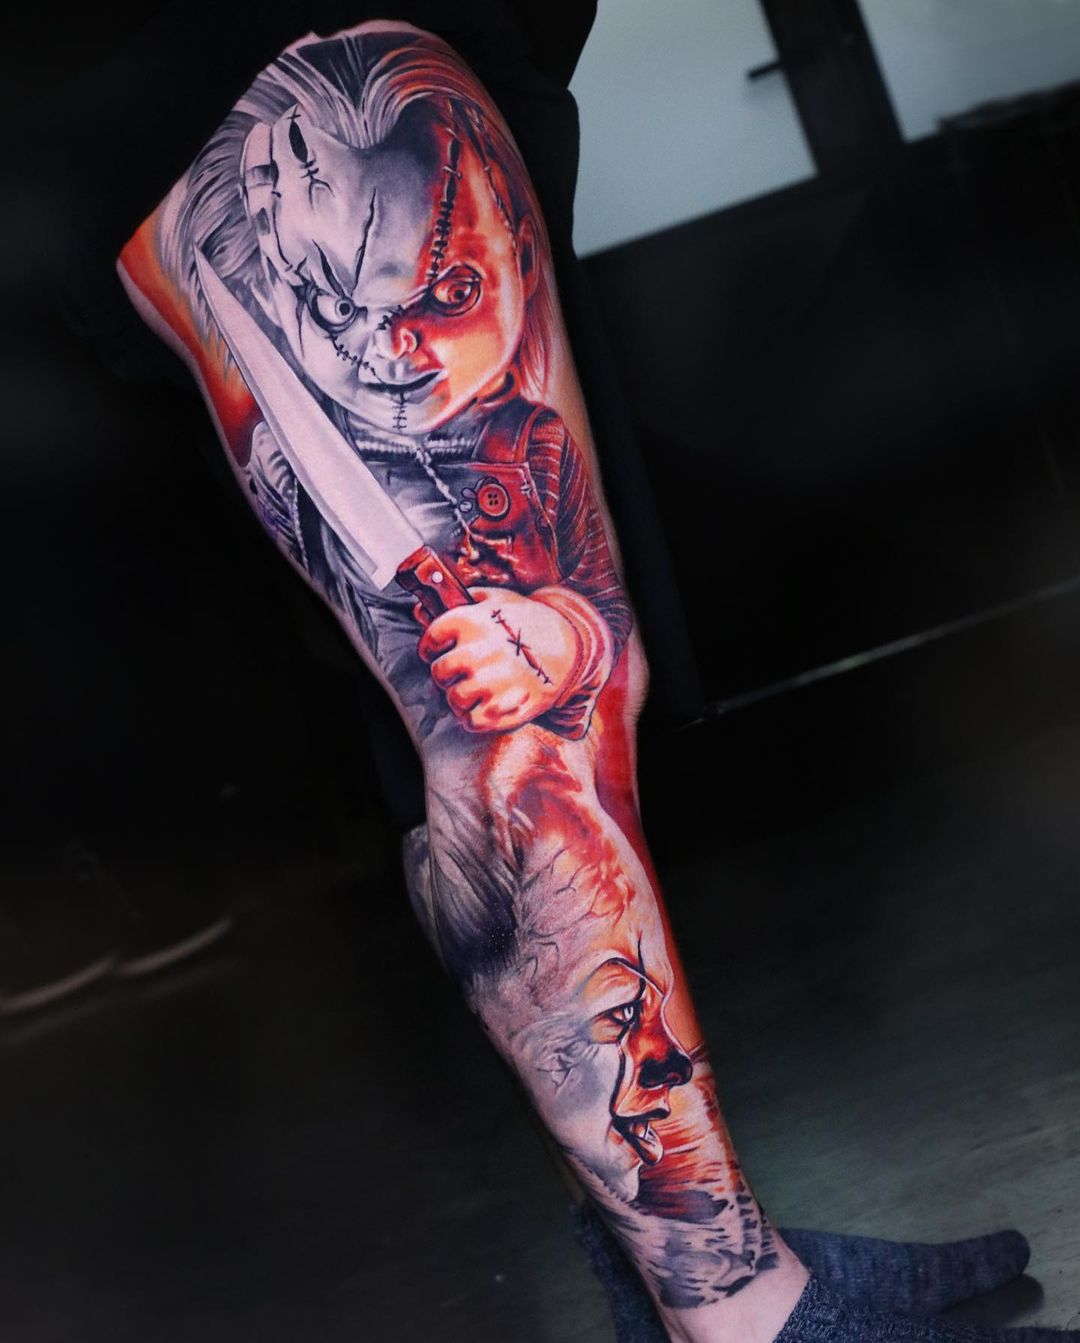 101 Best Chucky Tattoo Ideas You'll Have To See To Believe! - Outsons